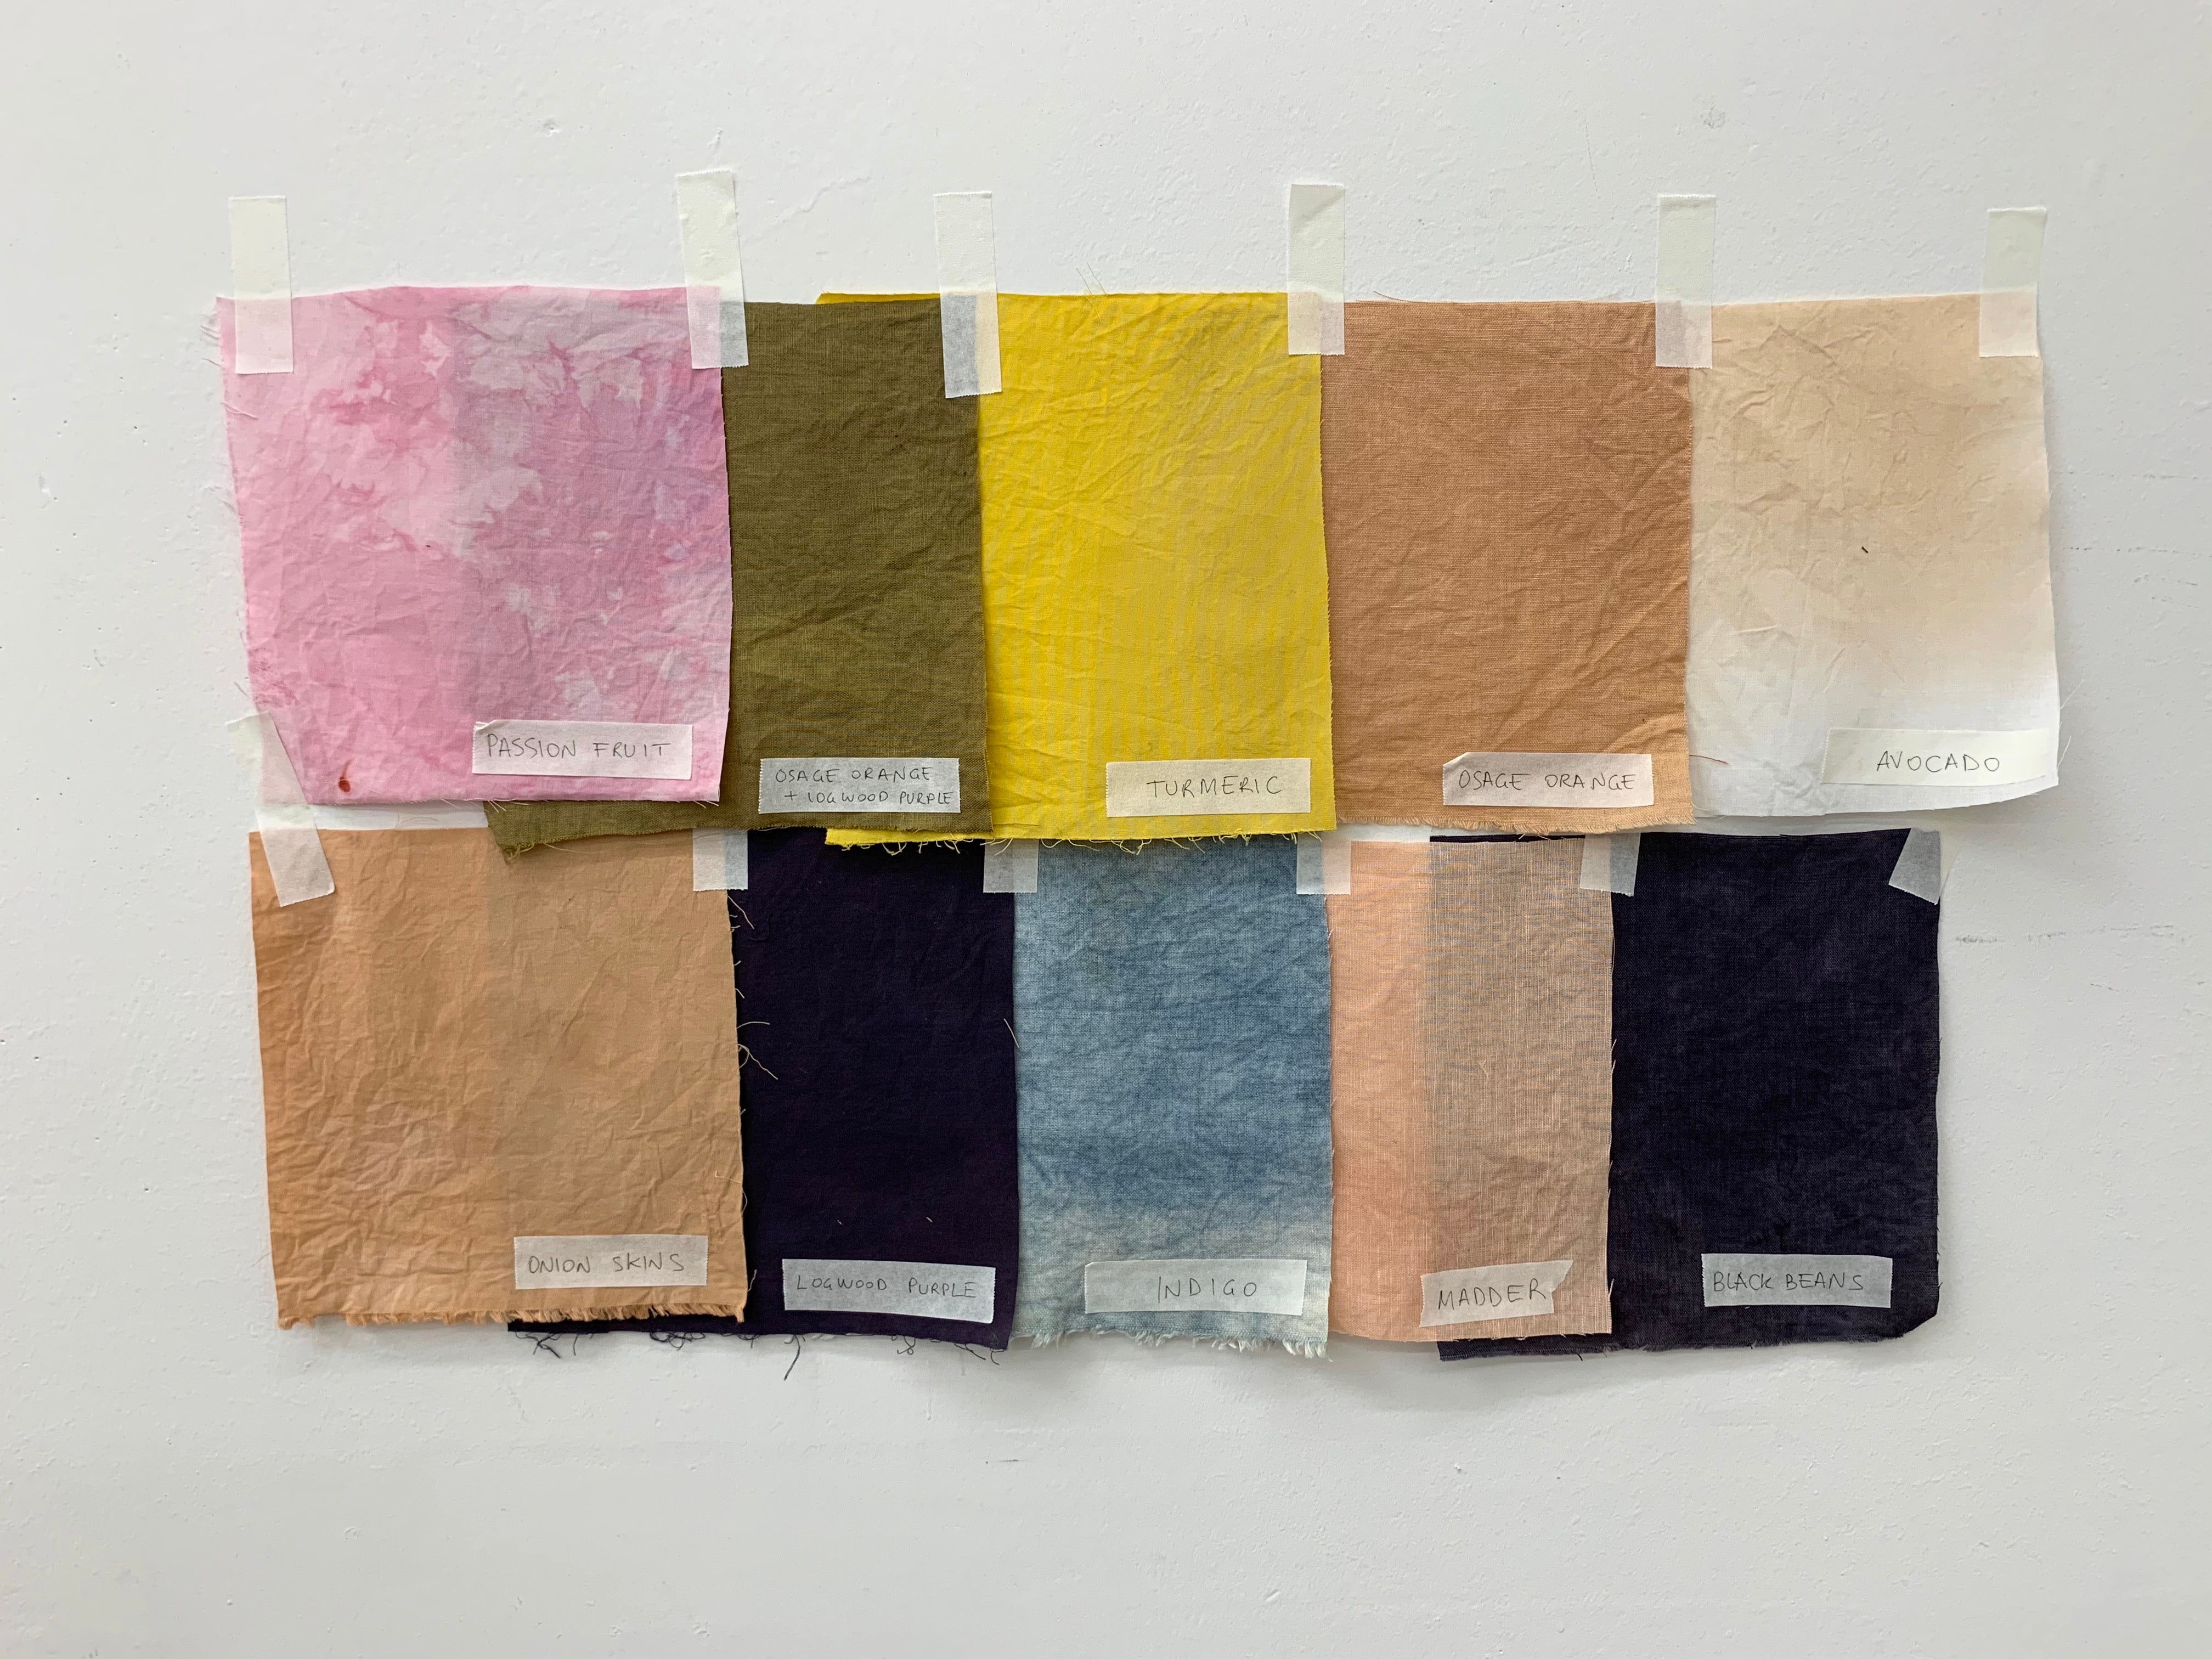 How to make natural dyes for fabric - a few beautiful and colorful